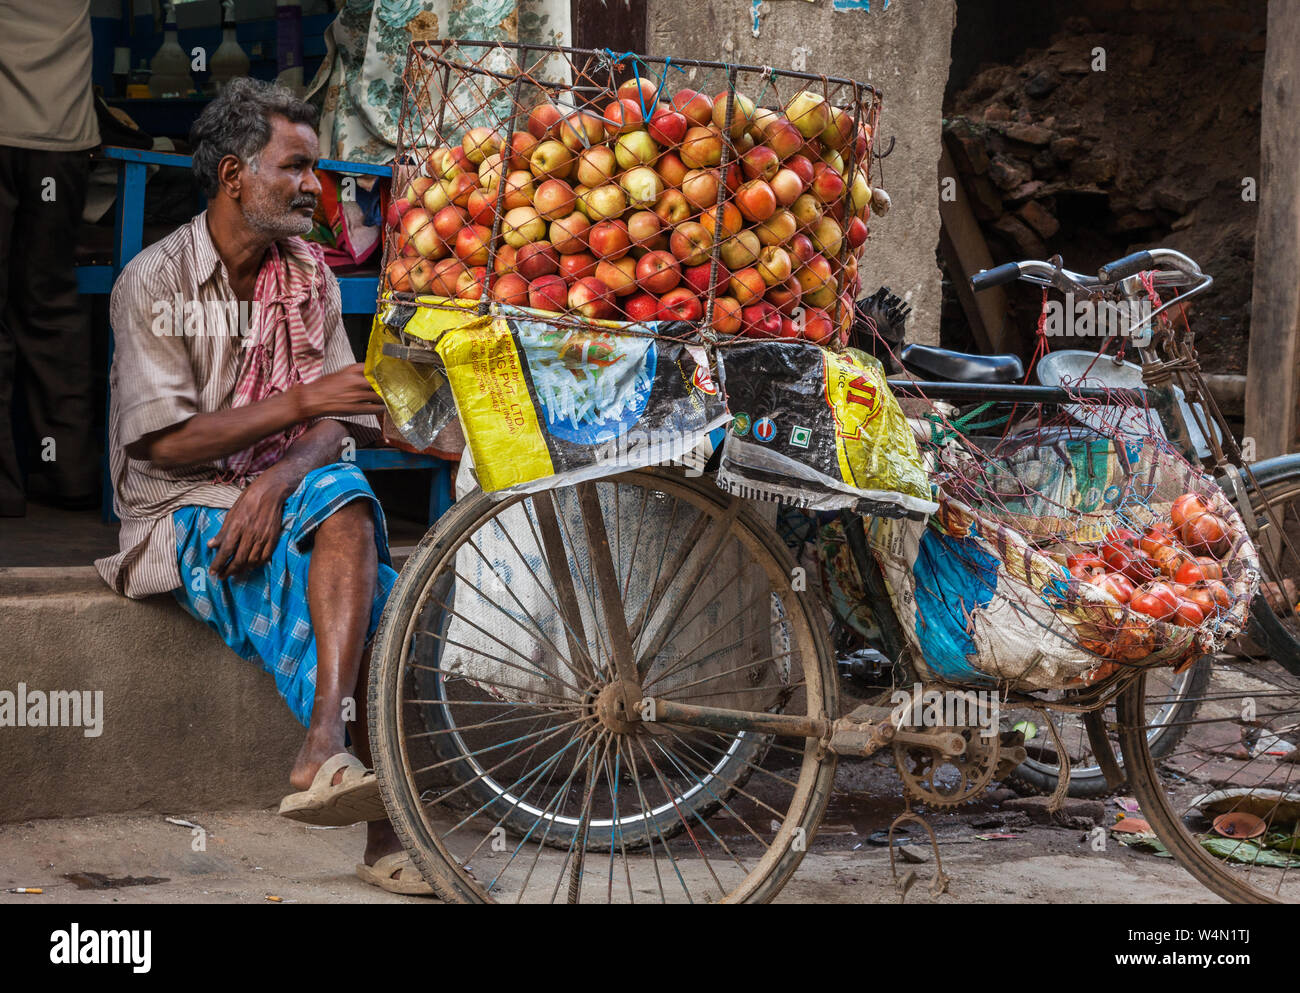 Man selling apples from his bicycle on a street in Kathmandu Stock Photo